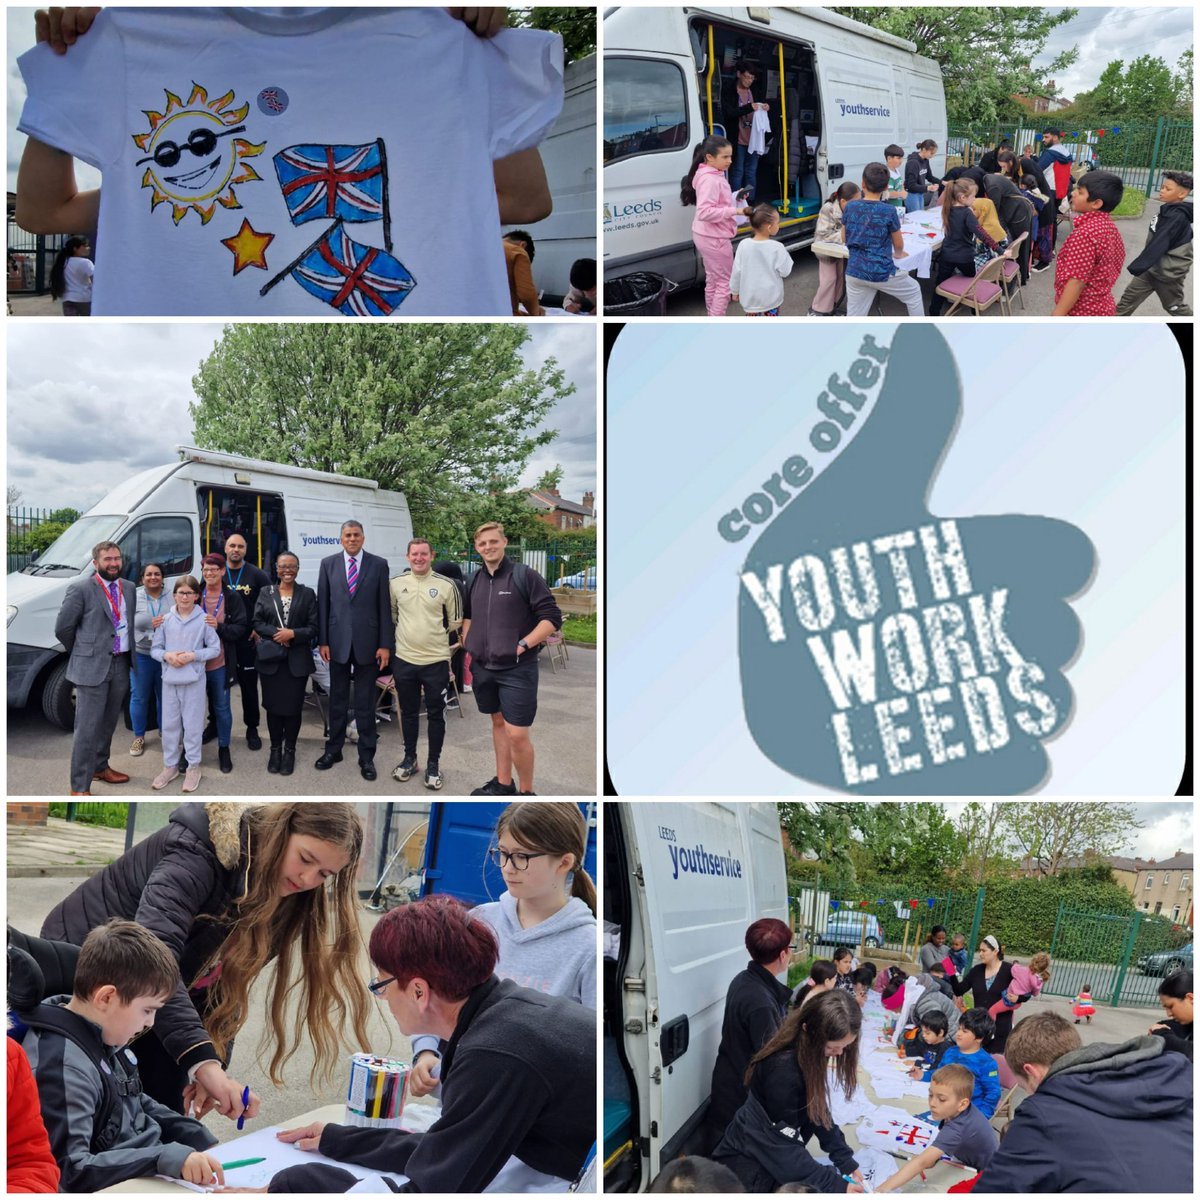 Our #Youthwork team loved being part of the #Nowells #CoronationDay event. Thanks to all parters who made this event possible. Amazing to see so many #Youngpeople having a great time #Youthwork #Burmantofts #RichmondHill #Community